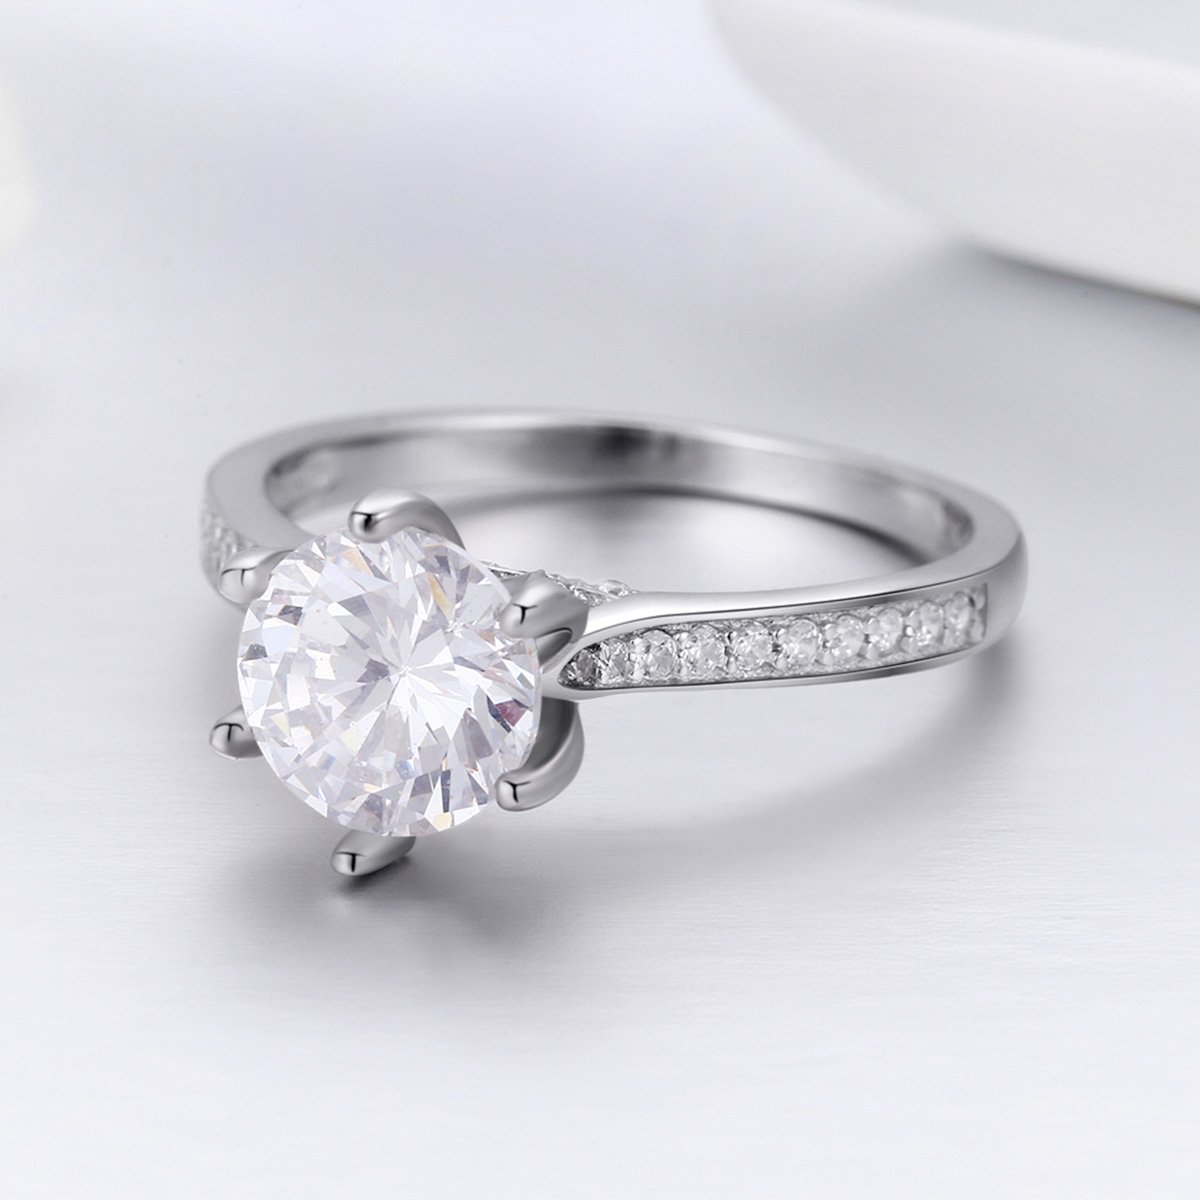 Fine Wedding Princess 925 Sterling Silver Ring - Aisllin Jewelry